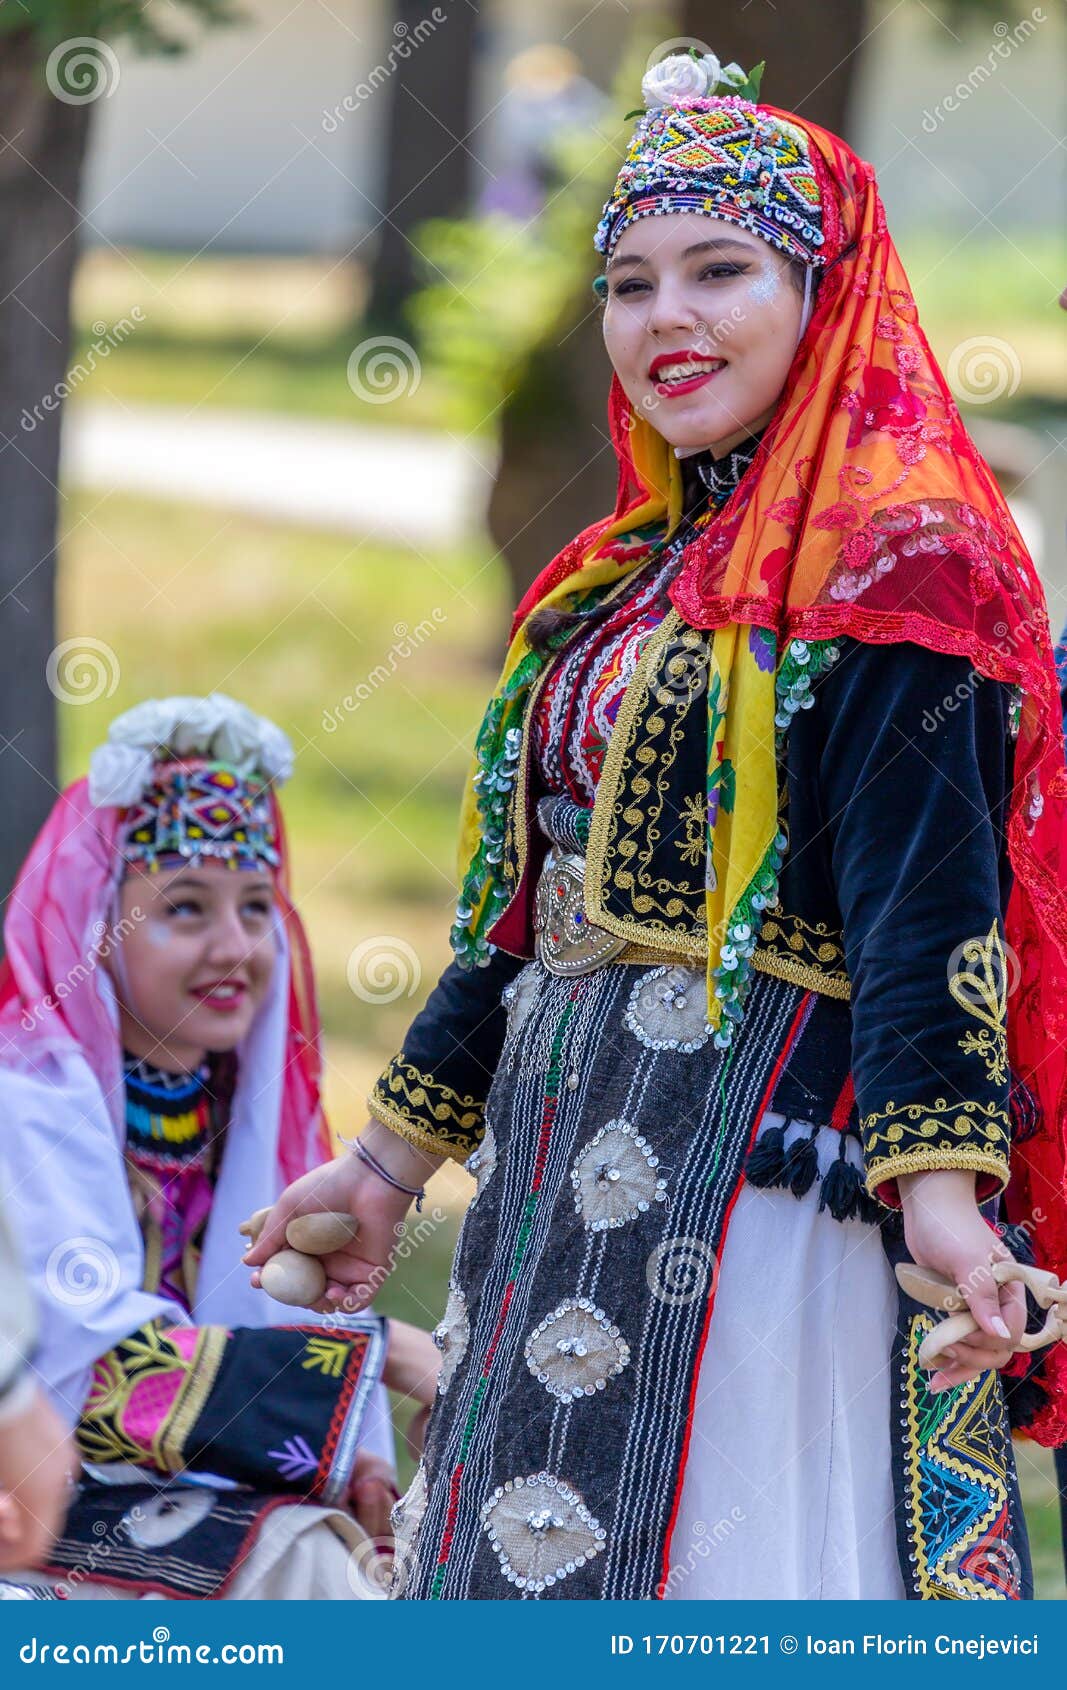 Young Girls from Turkey in Traditional Costume Editorial Photo